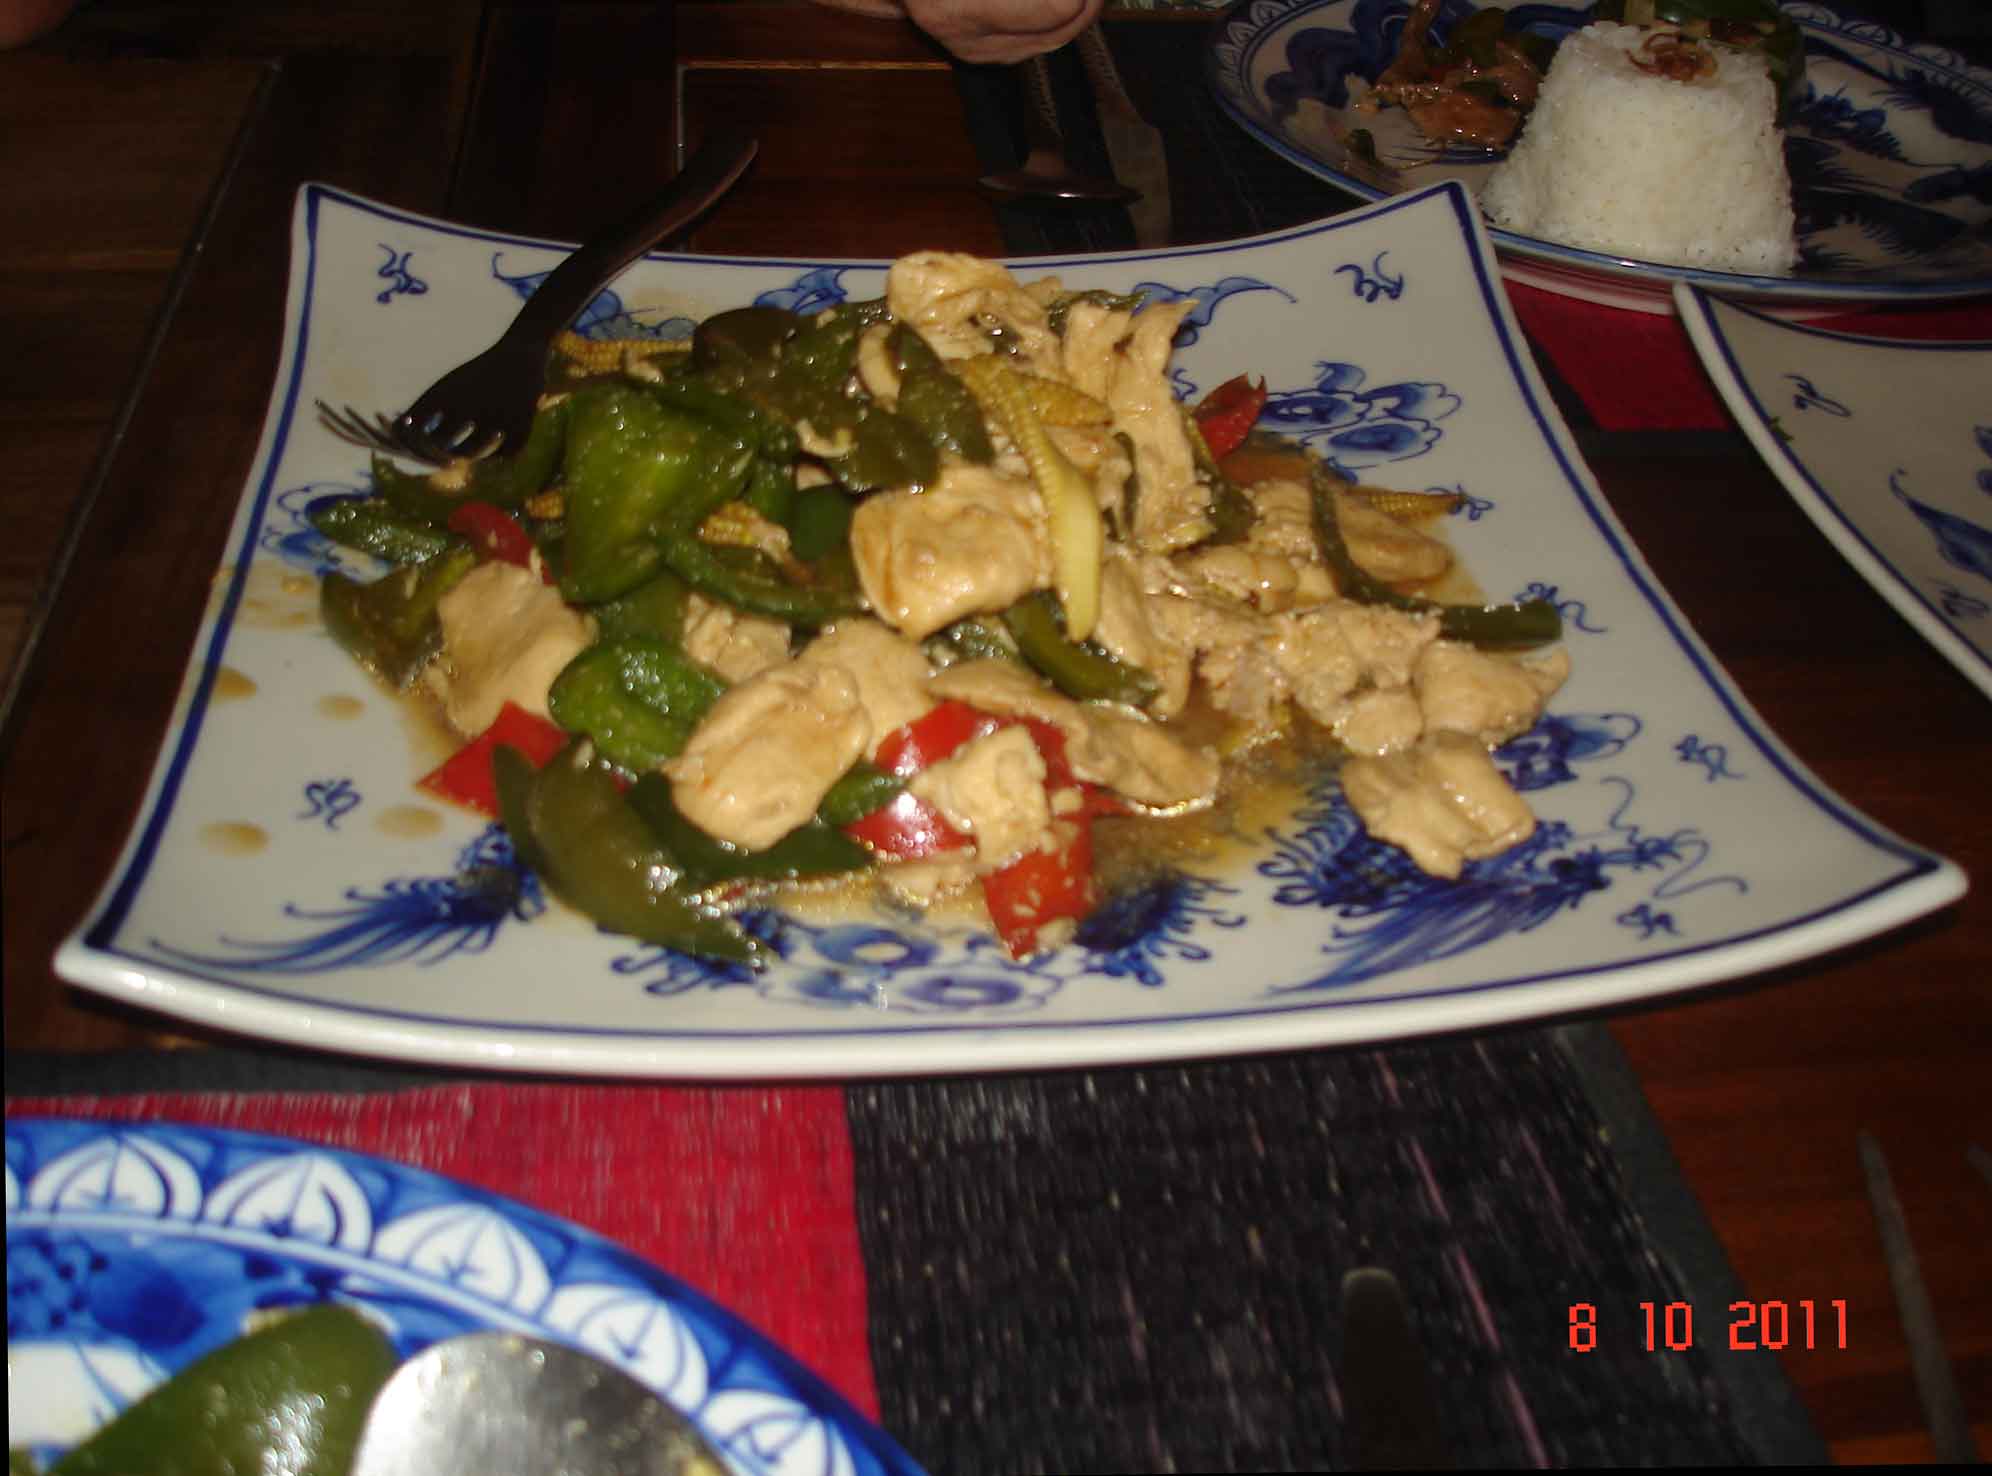 Restaurant Phnom Penh delicious Khmer food -Asian food with a difference